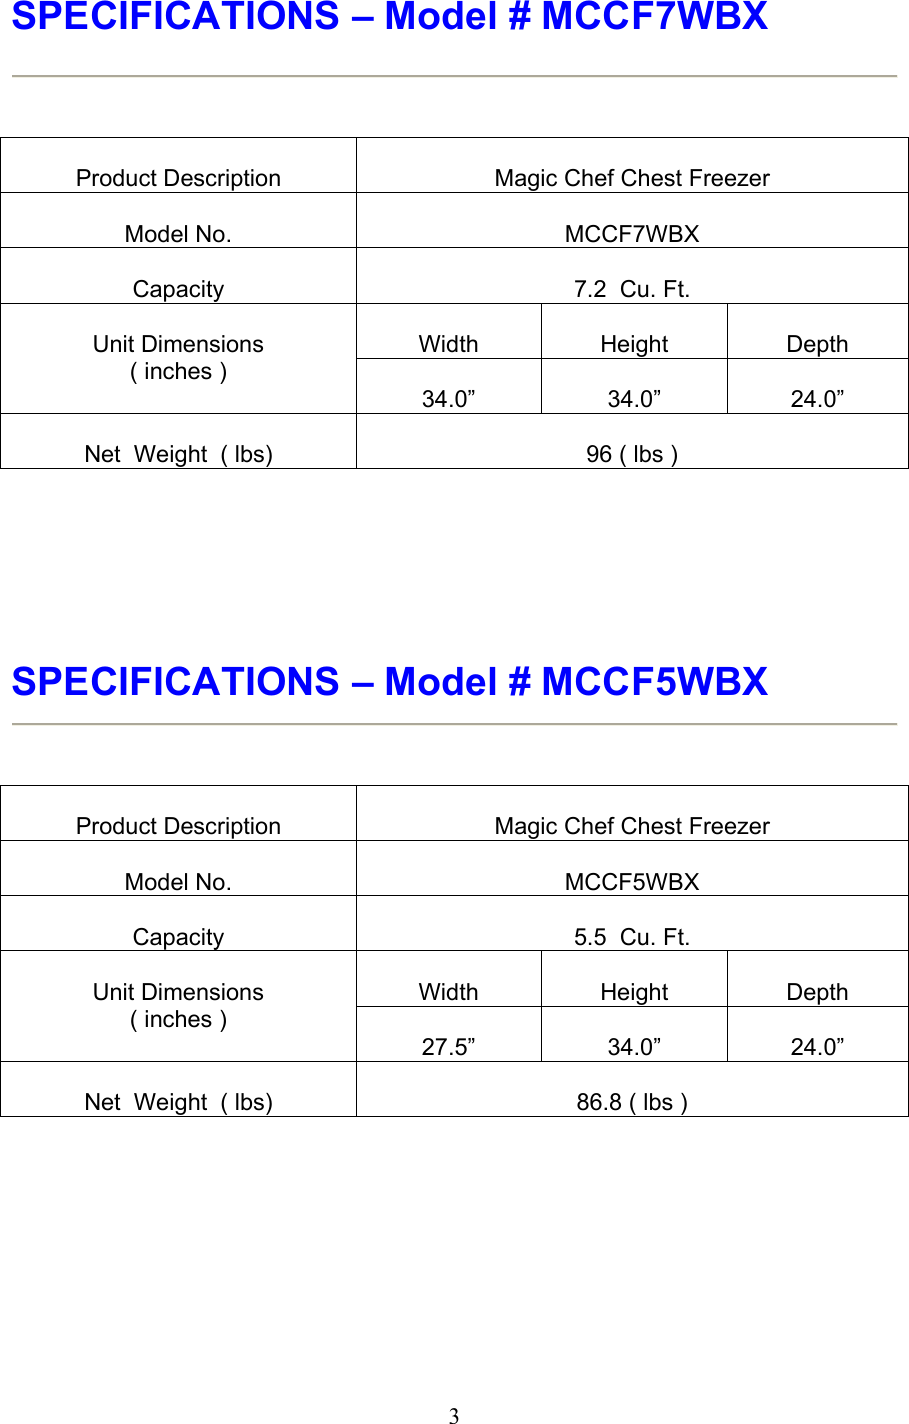 Page 4 of 11 - Magic-Chef Magic-Chef-Mccf7Wbx-Owners-Manual - Manual For Chest Freezer _English_ 4.30.08 _confirmed_